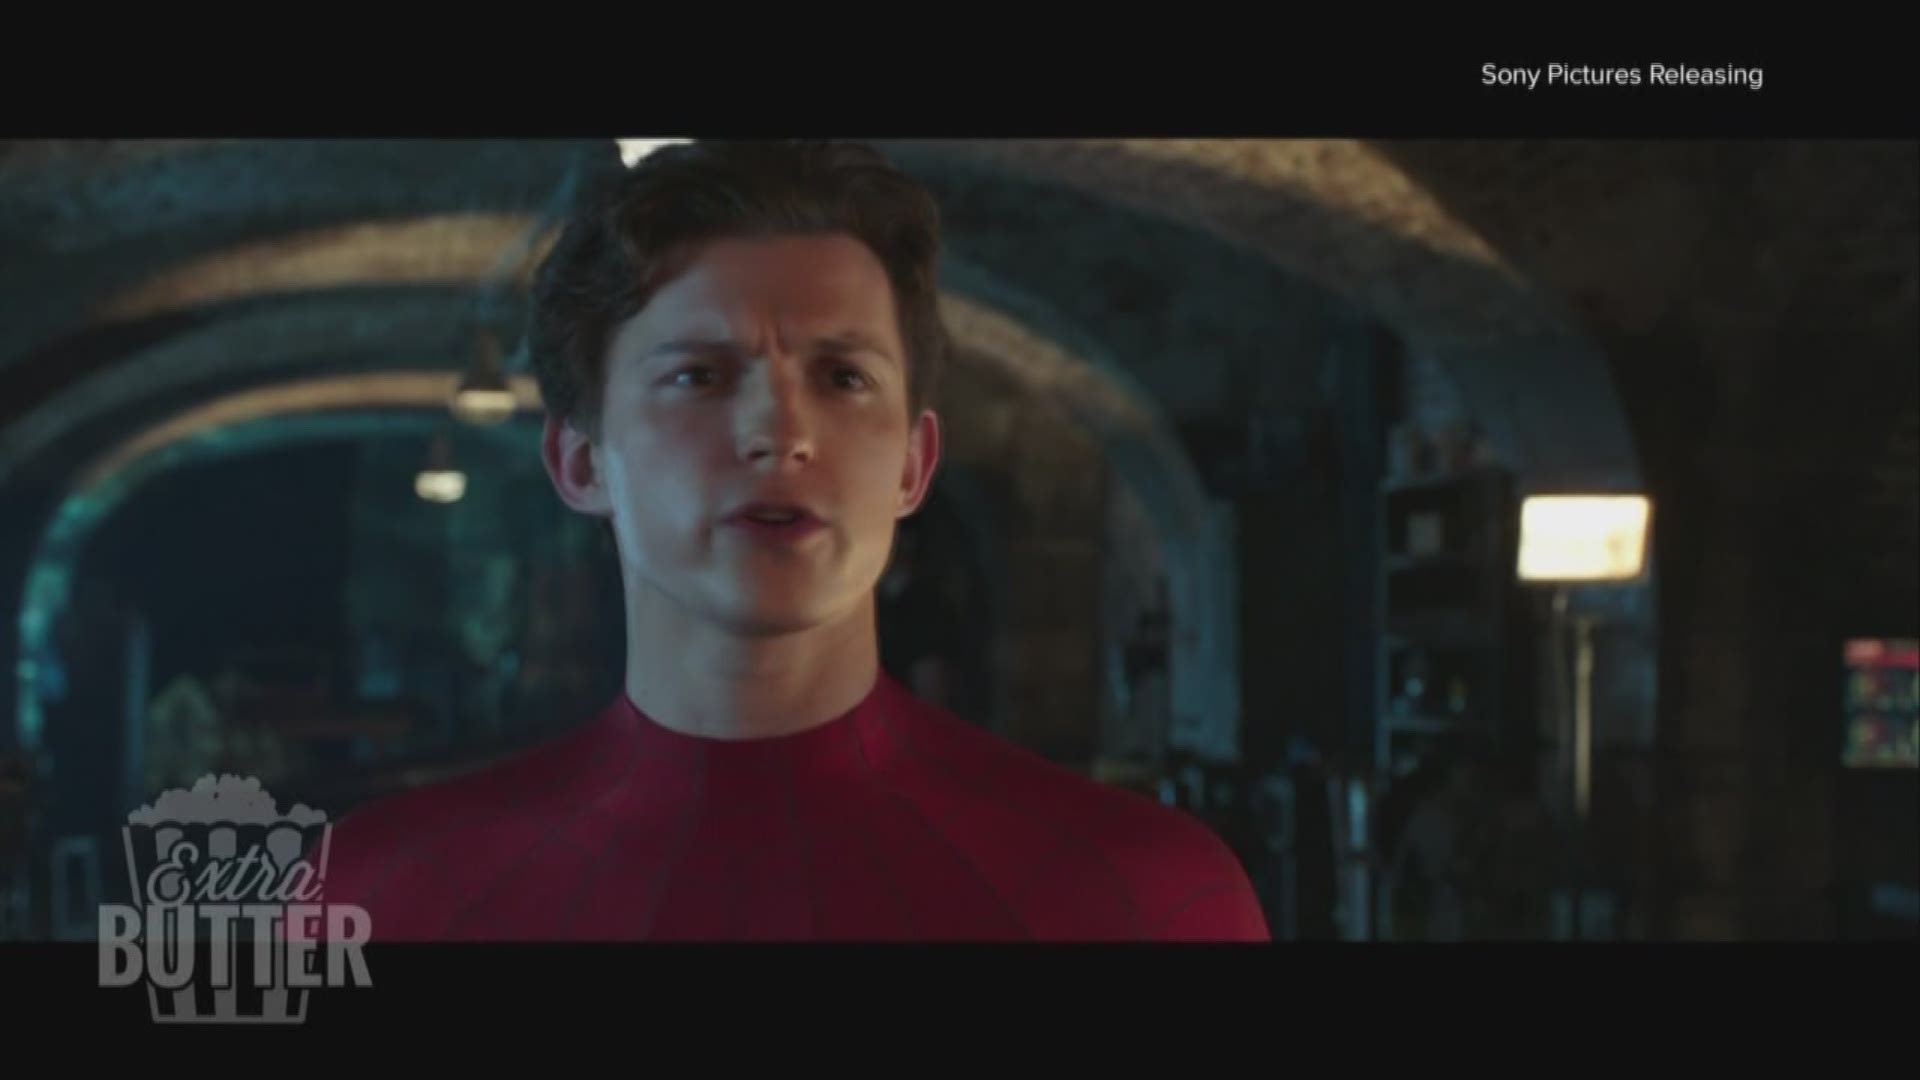 Extra Butter reviews the new 'Spider-Man' movie and talks with stars Tom Holland and Zendaya. Plus, Shawn Edwards talks about Tom Holland and Stan Lee's Spider-Man.